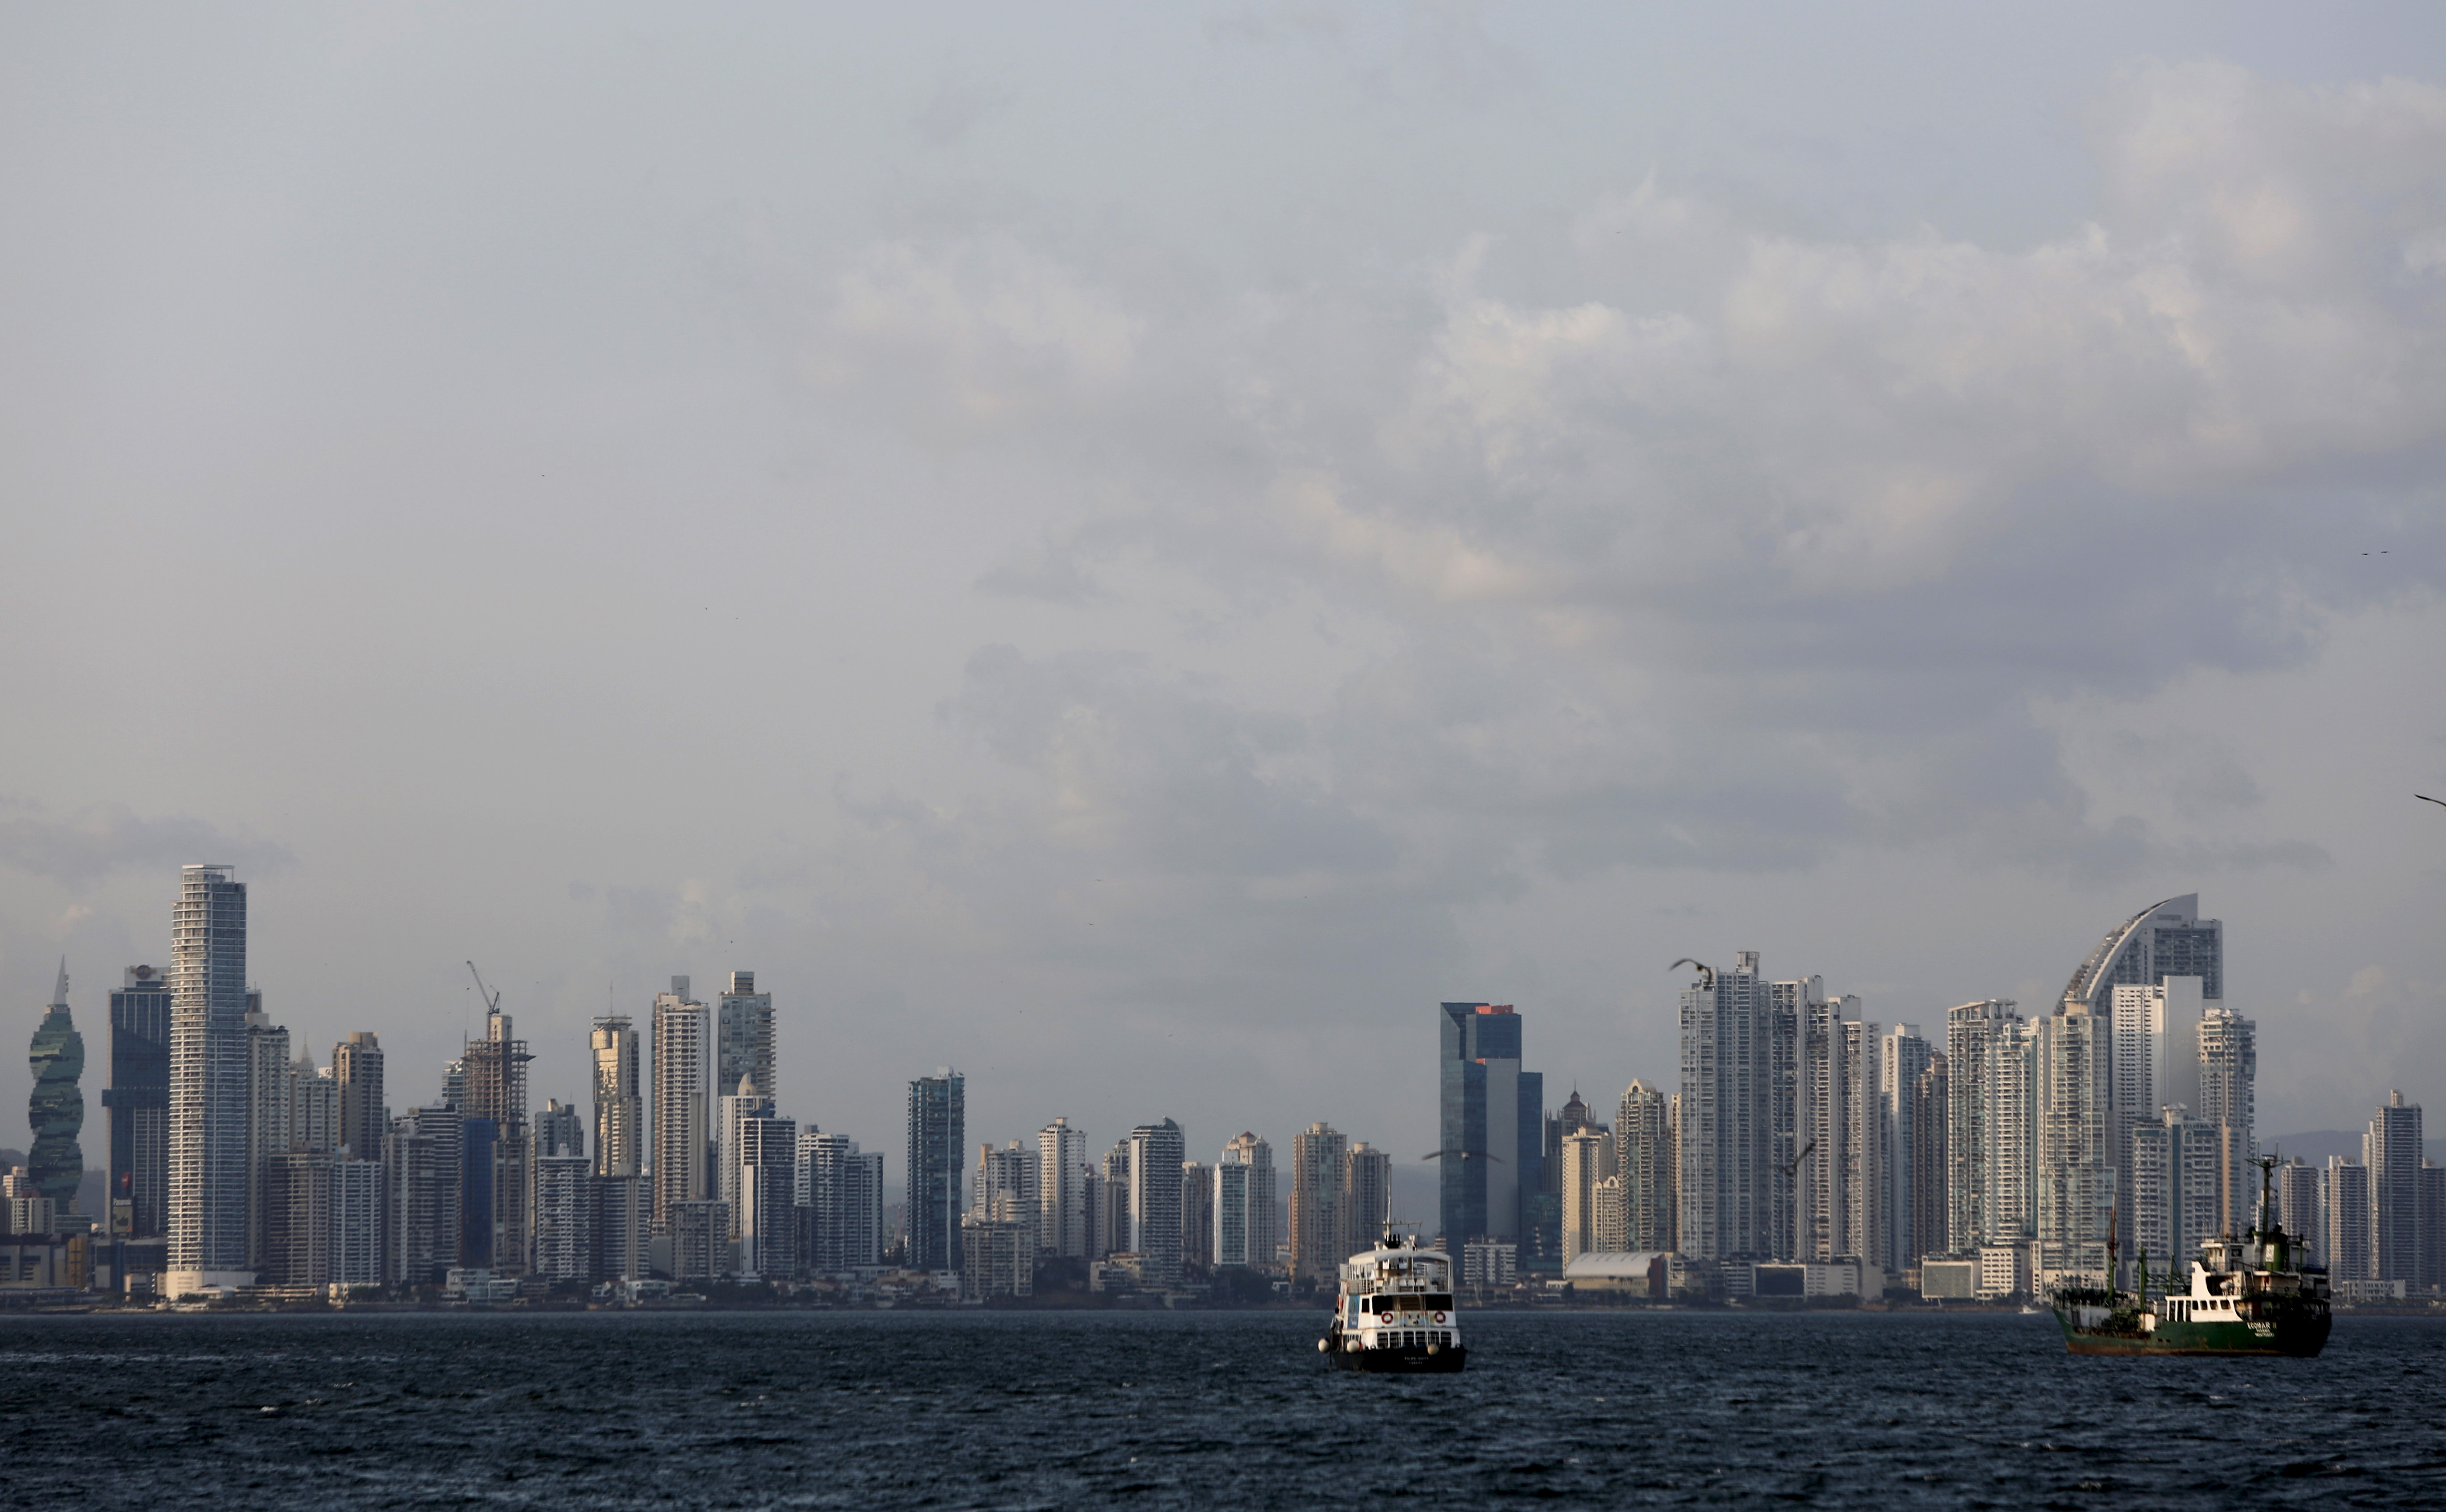 A general view of the skyline of Panama City